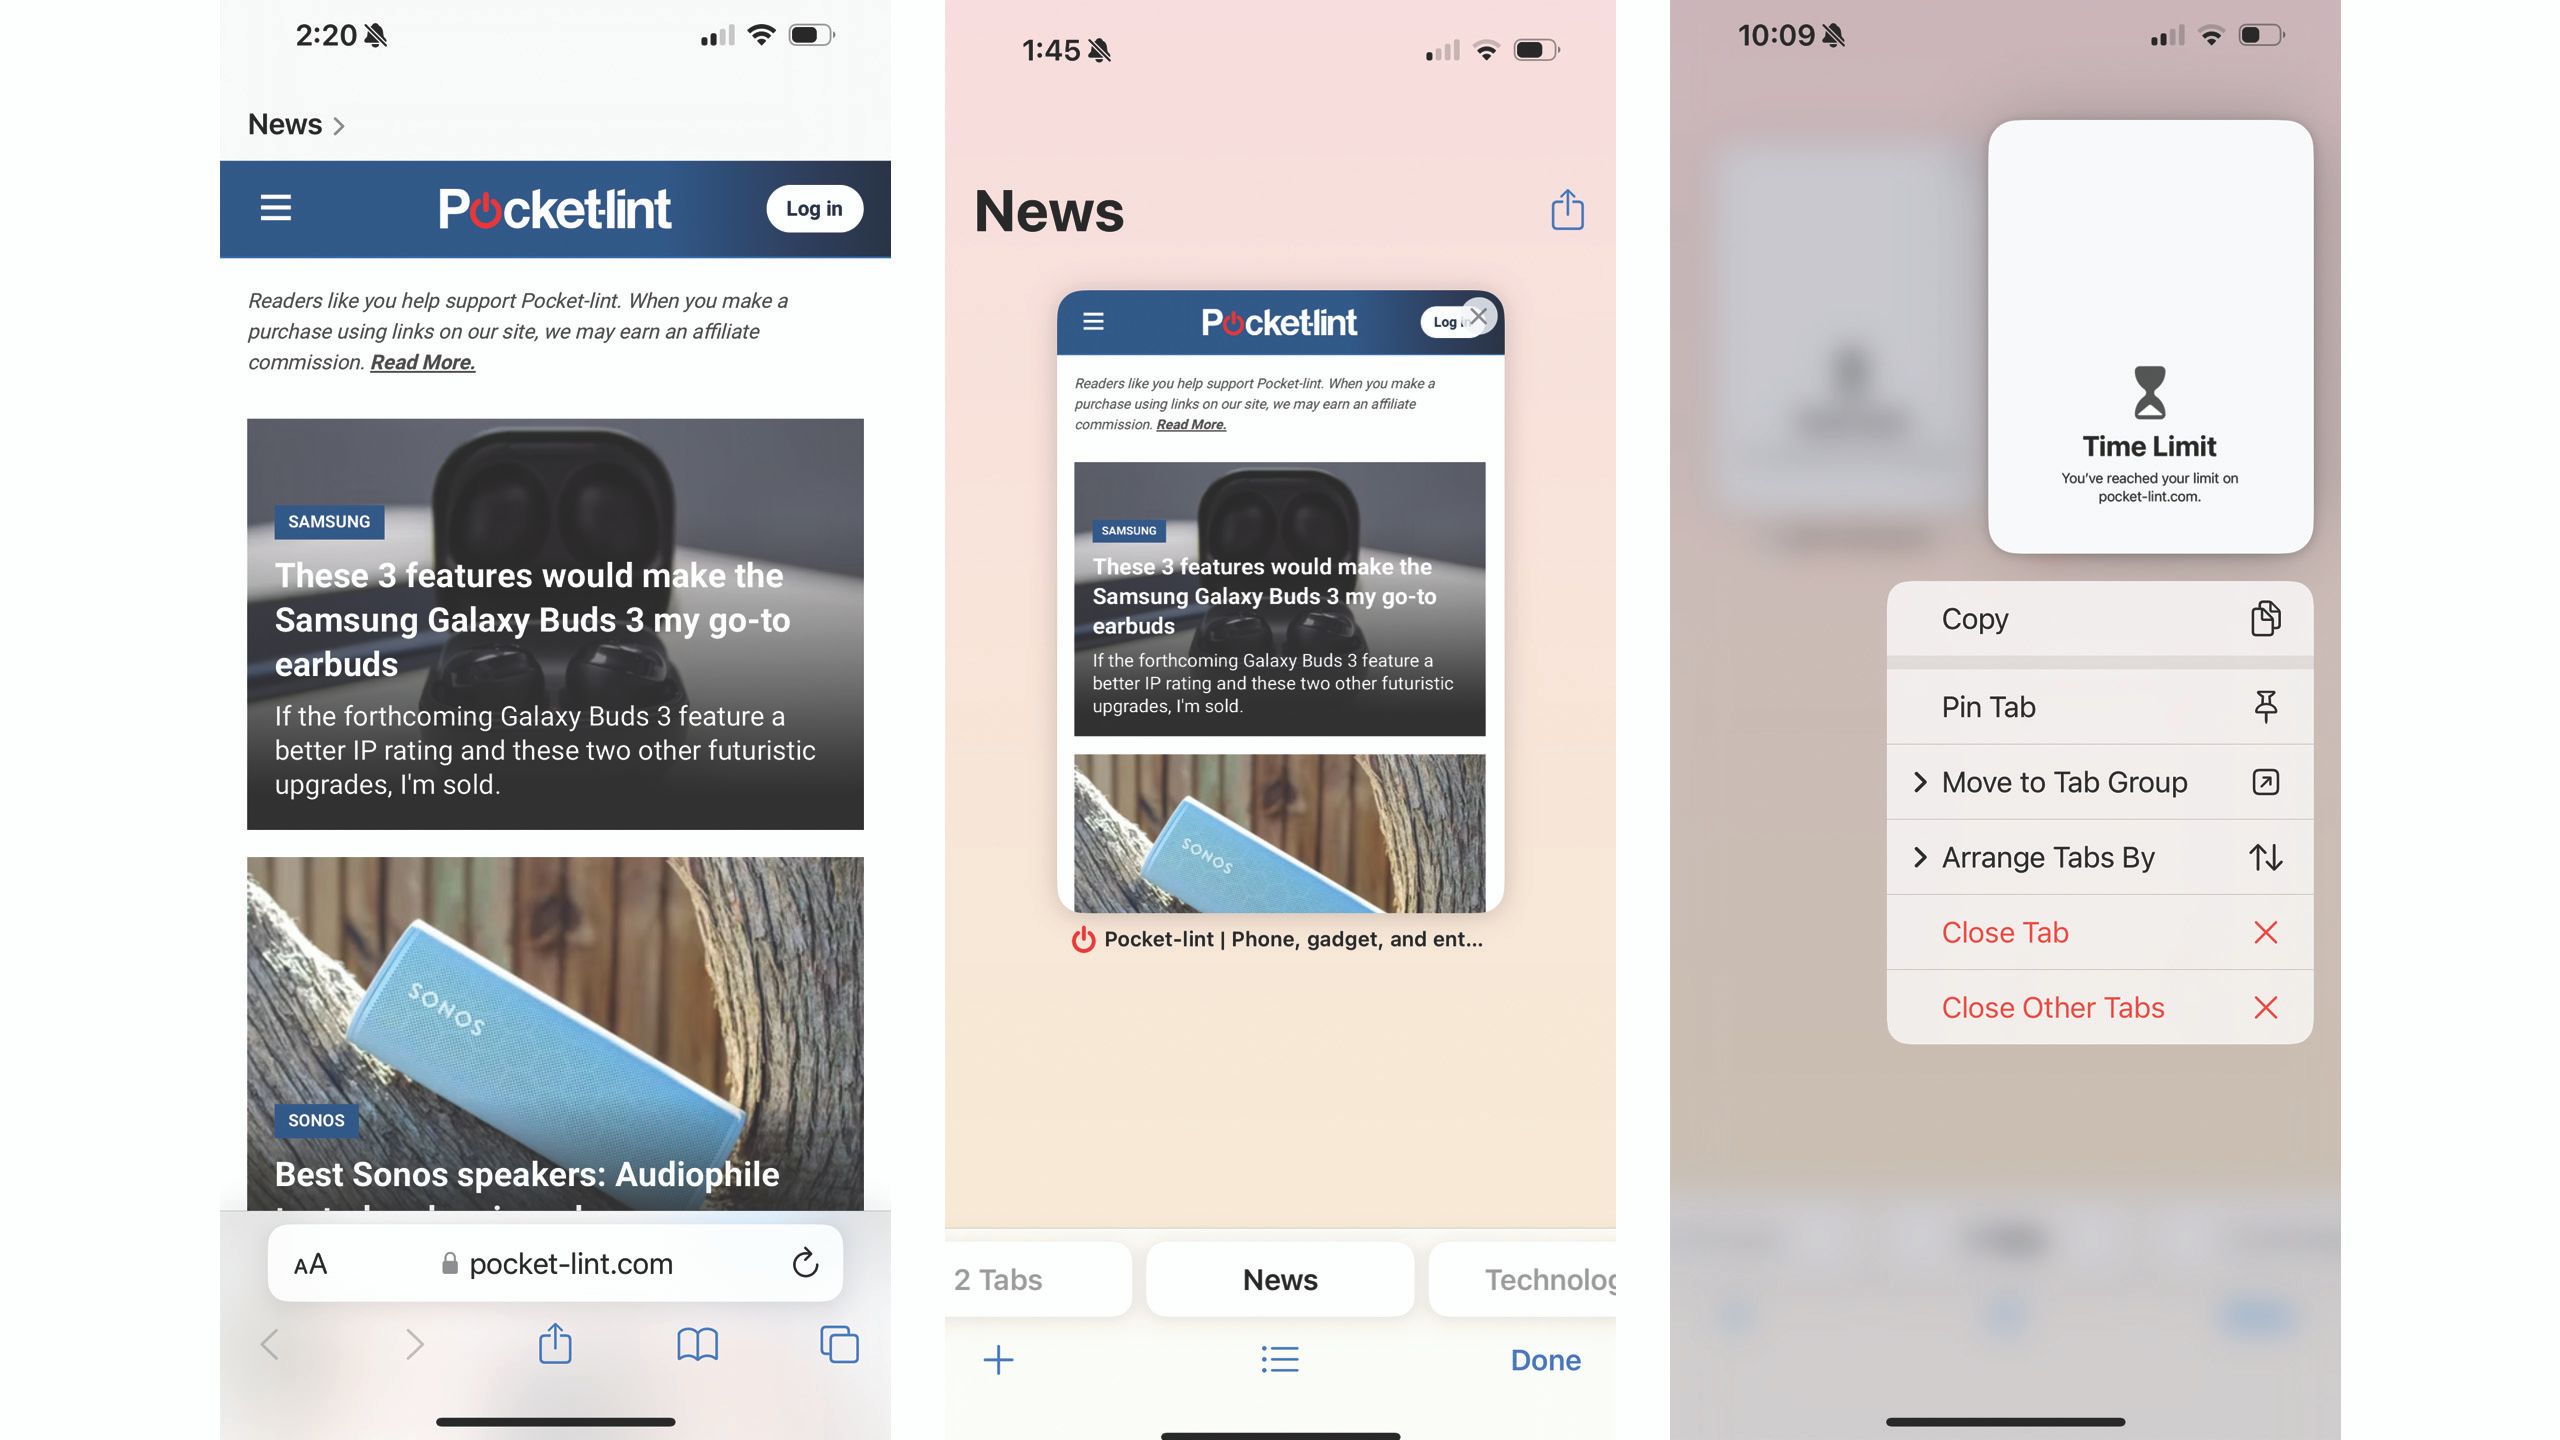 Screenshots of the process to close all tabs on an iPhone or iPad